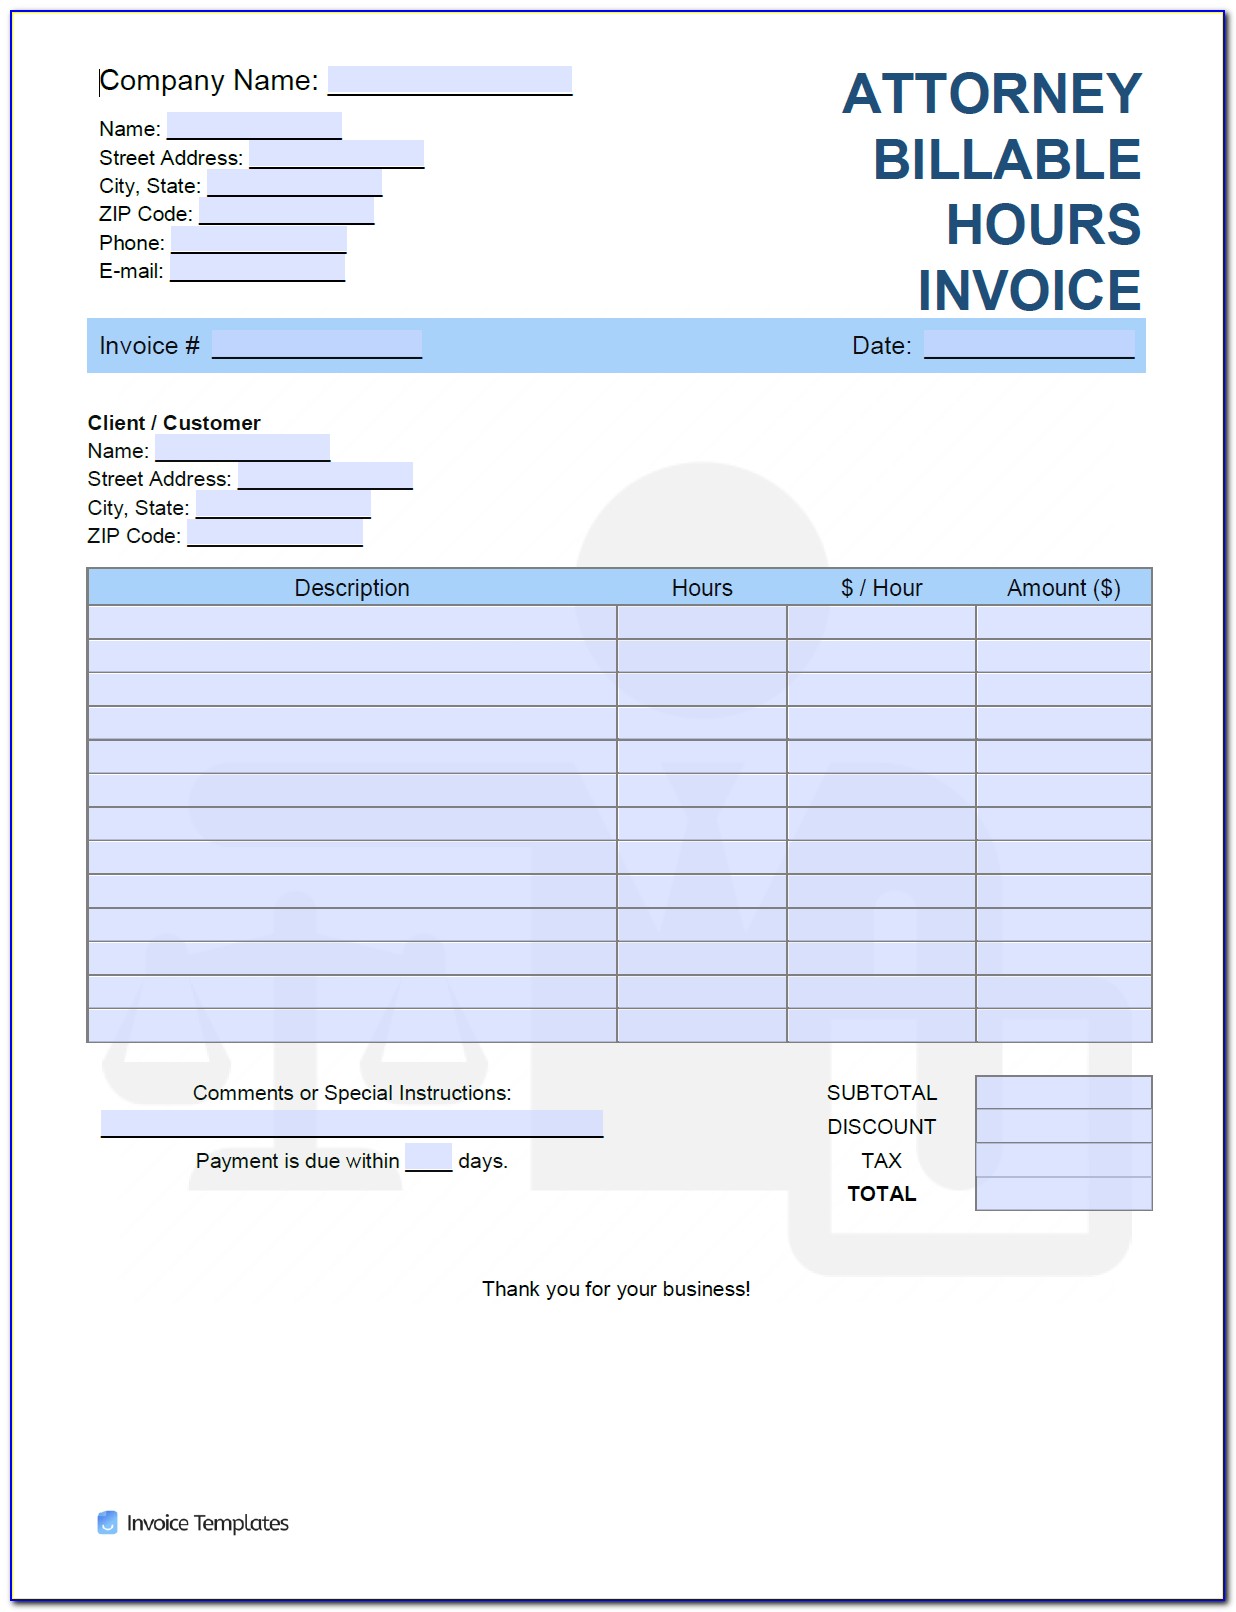 Billable Hours Invoice Template